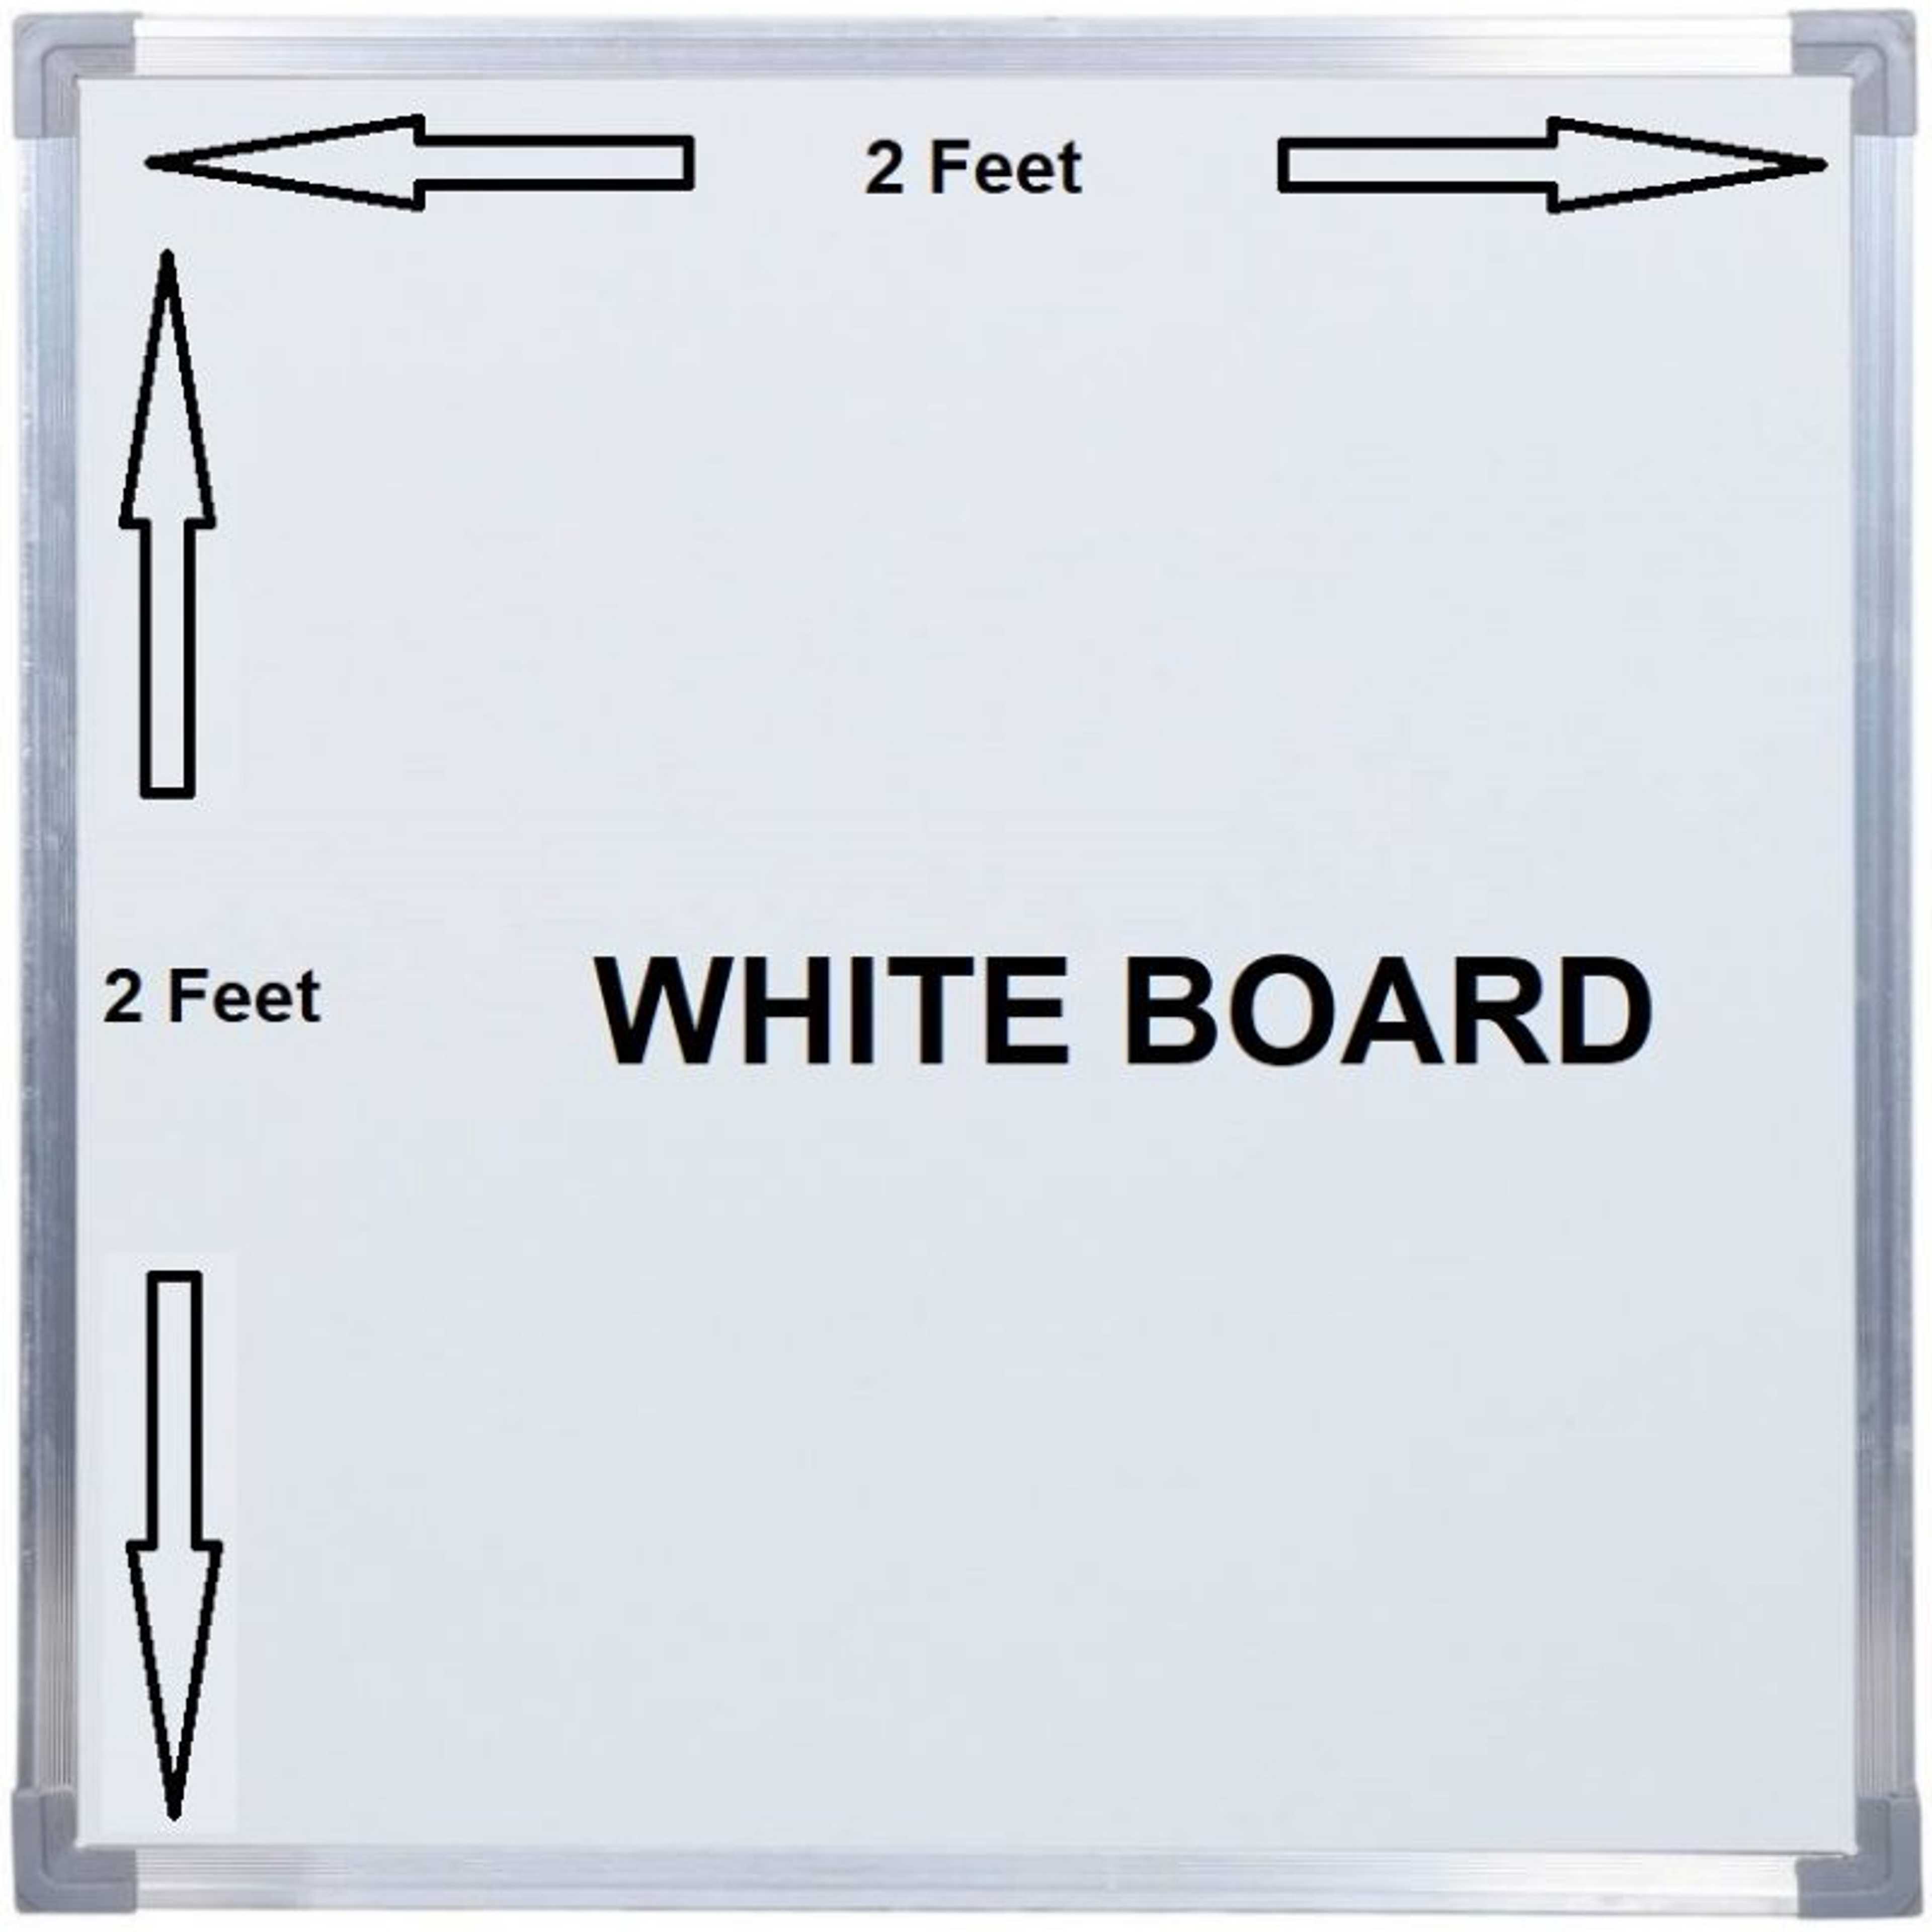 2ft x 2ft Dry Erase White Board Hanging Writing Drawing & Planning Whiteboard